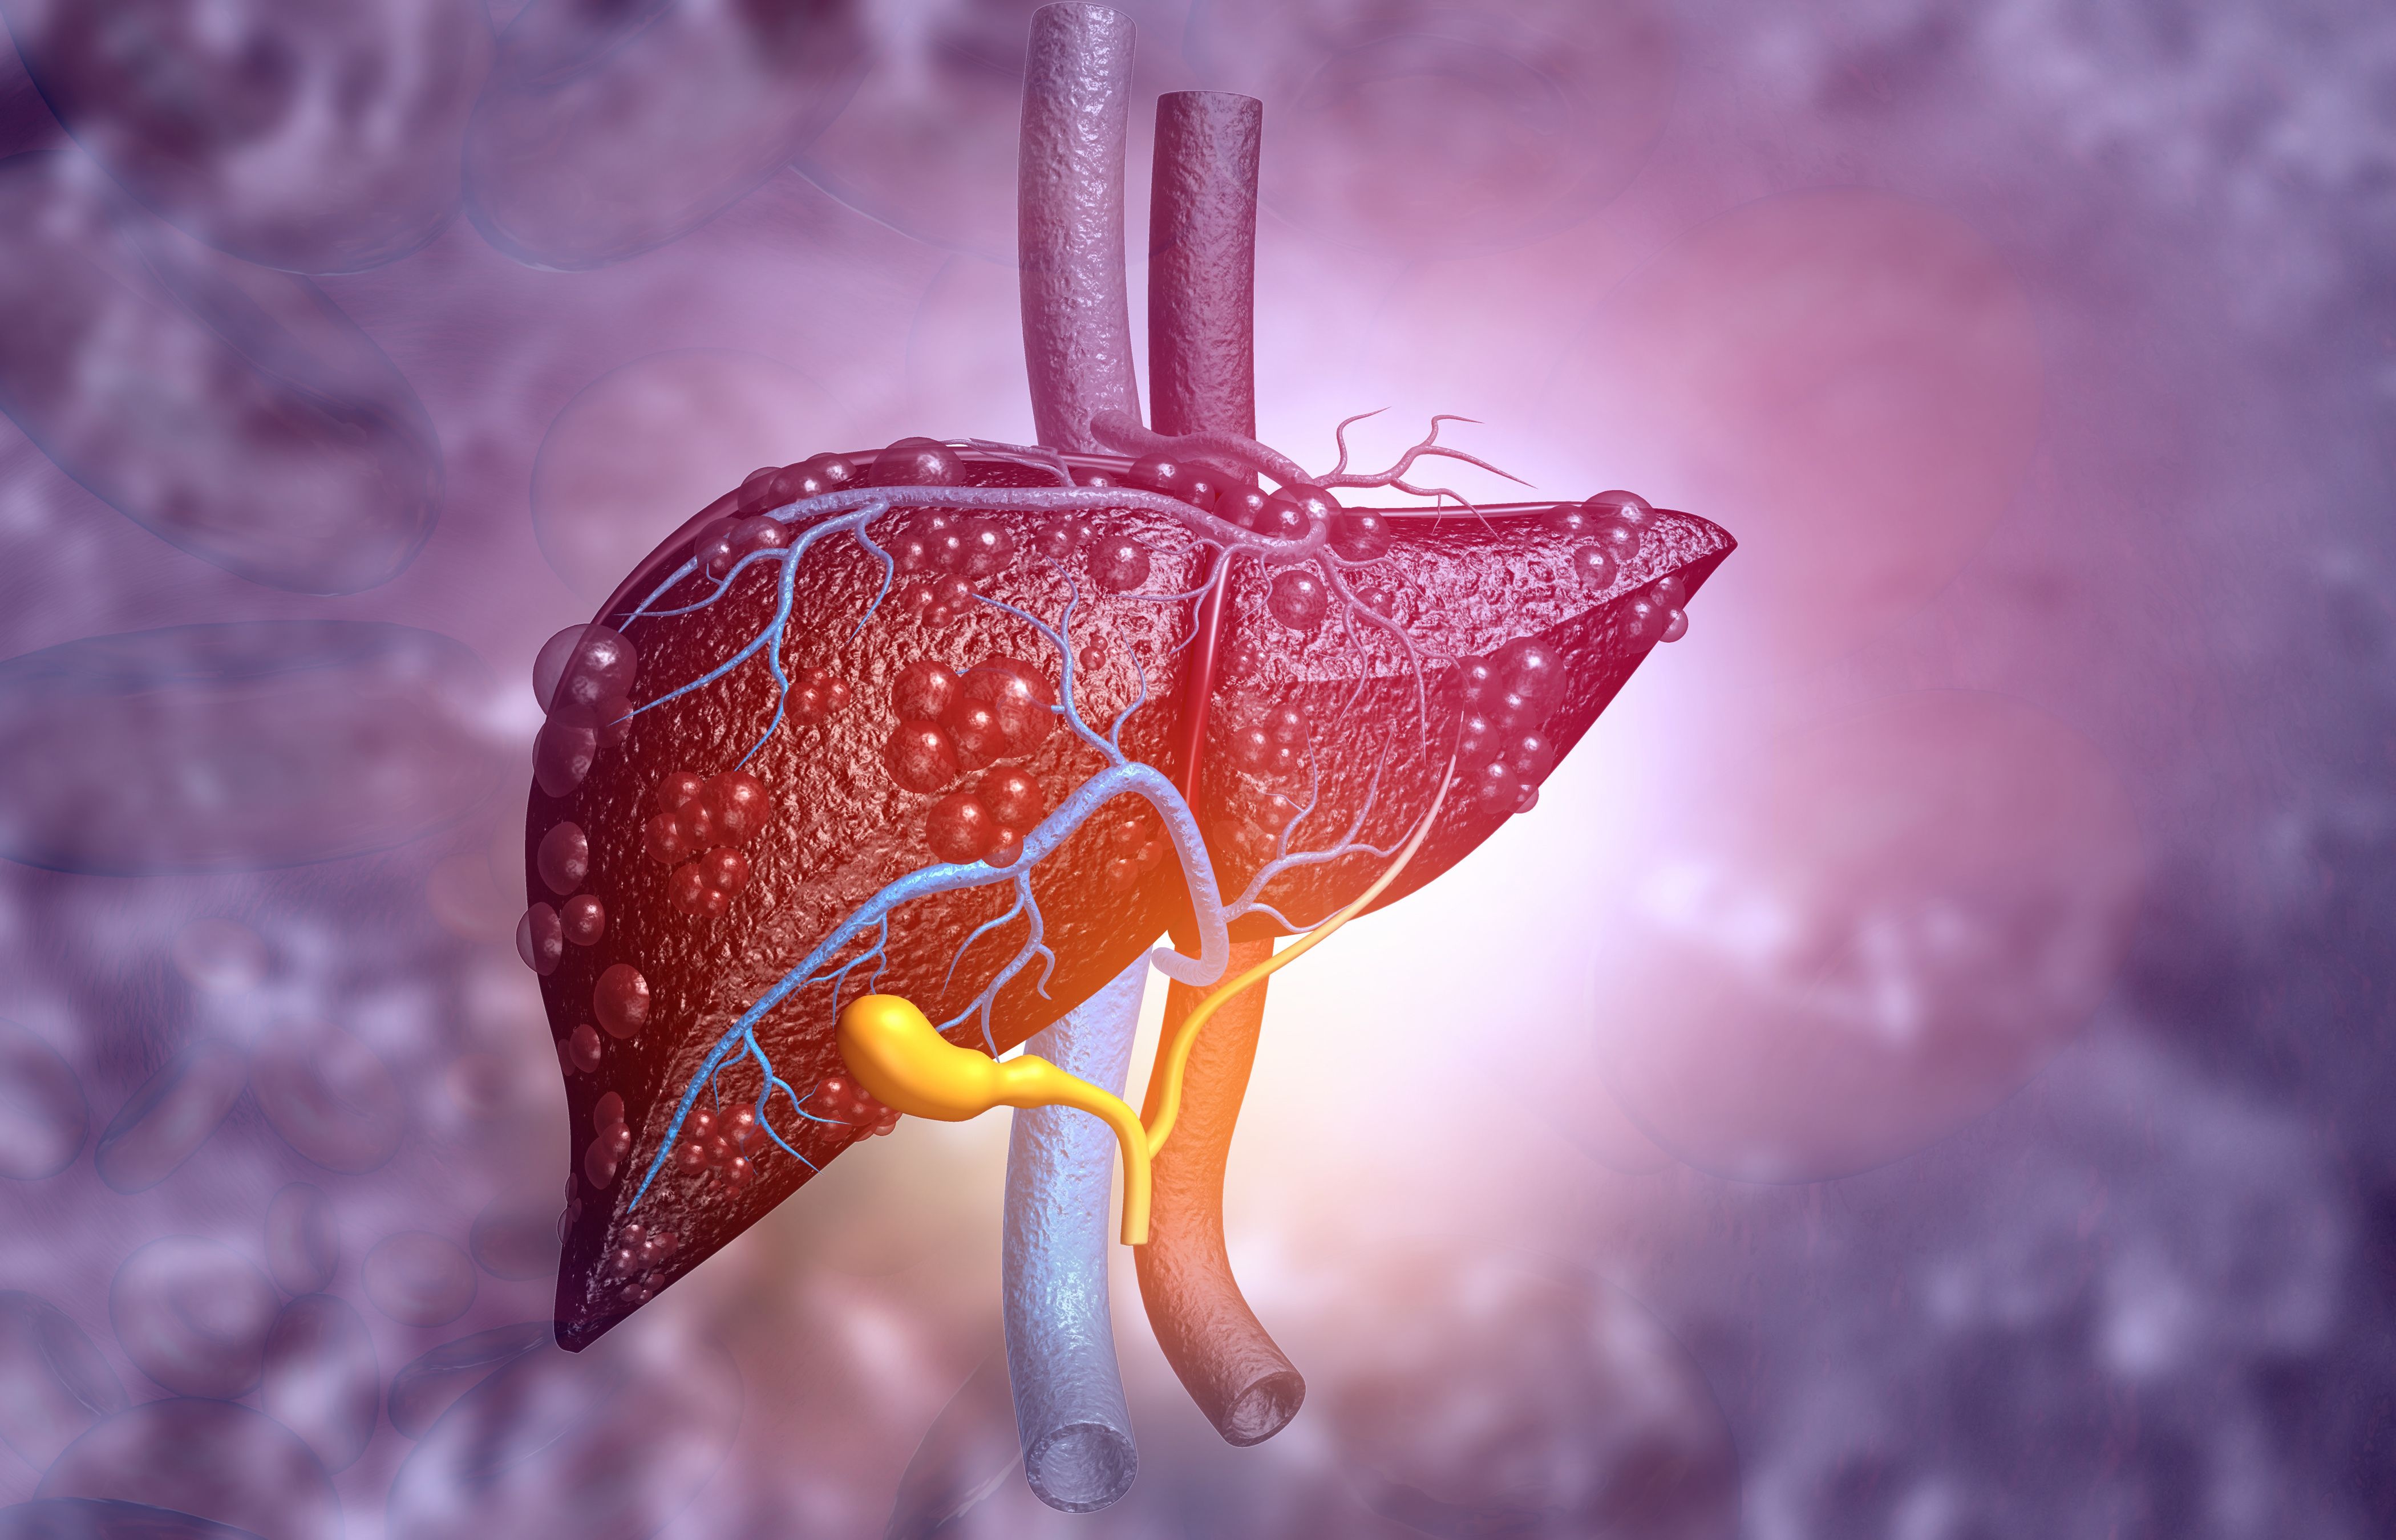 Hepatitis C Treatment Also Reduces Liver Disease and Death